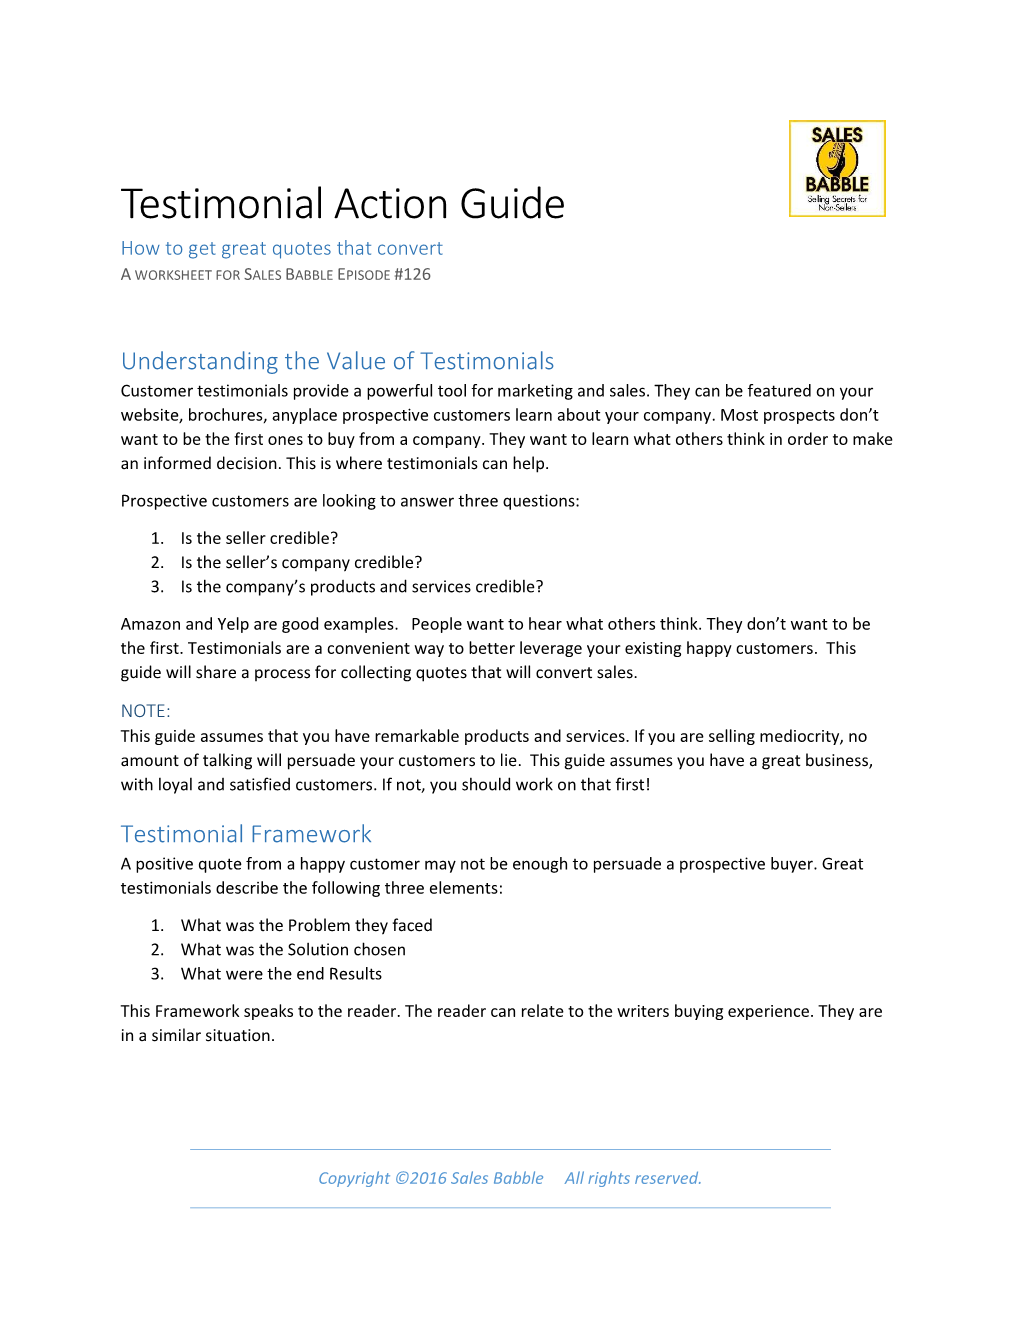 Testimonial Action Guide How to Get Great Quotes That Convert a WORKSHEET for SALES BABBLE EPISODE #126